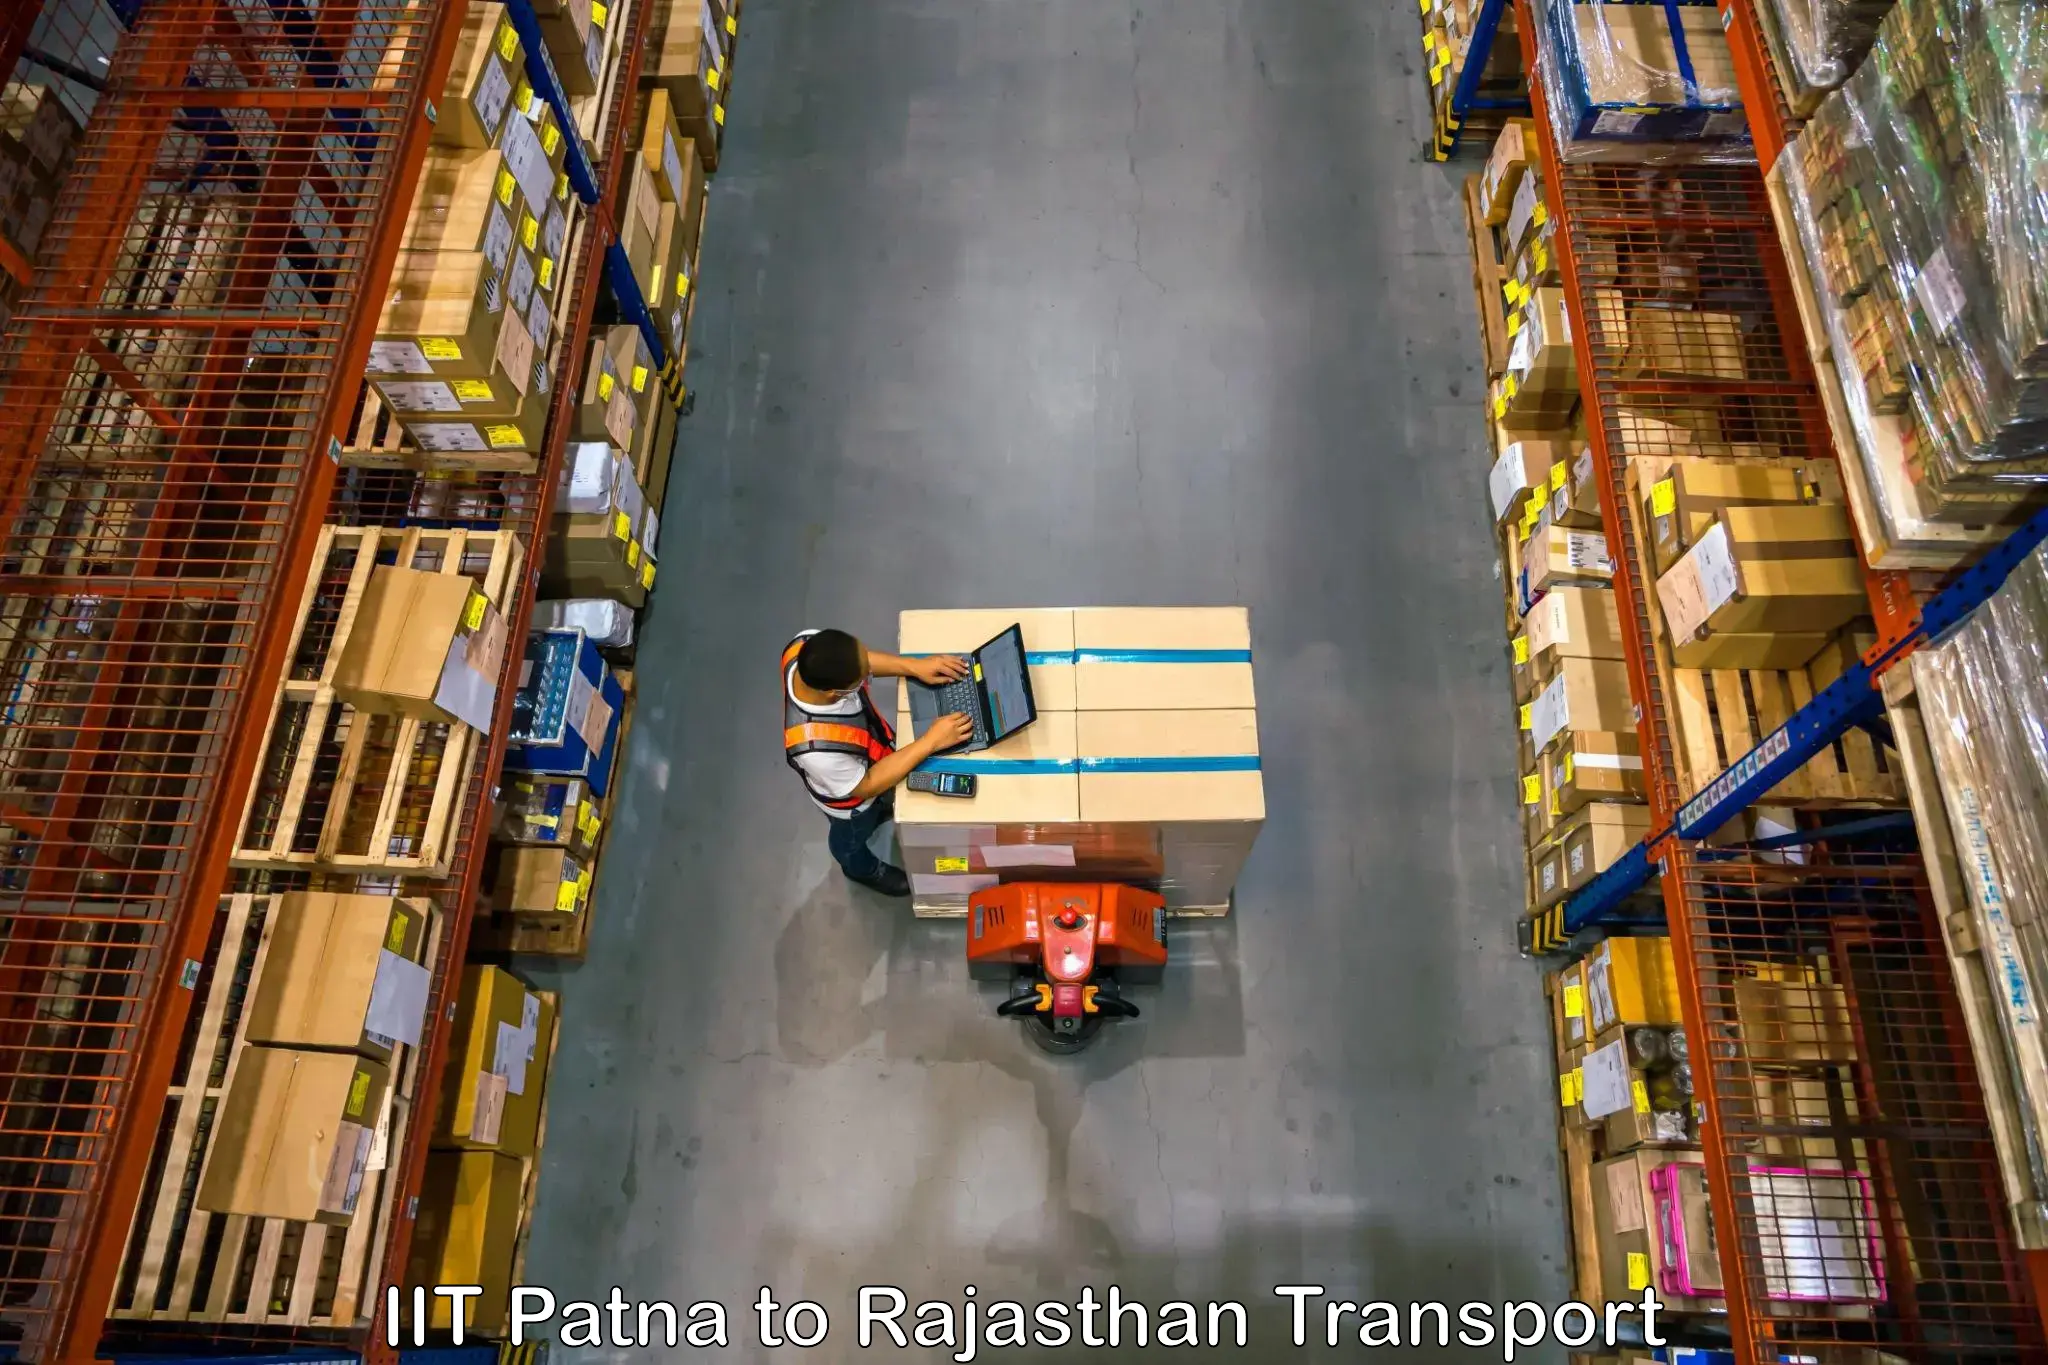 Container transport service IIT Patna to Fatehpur Sikar